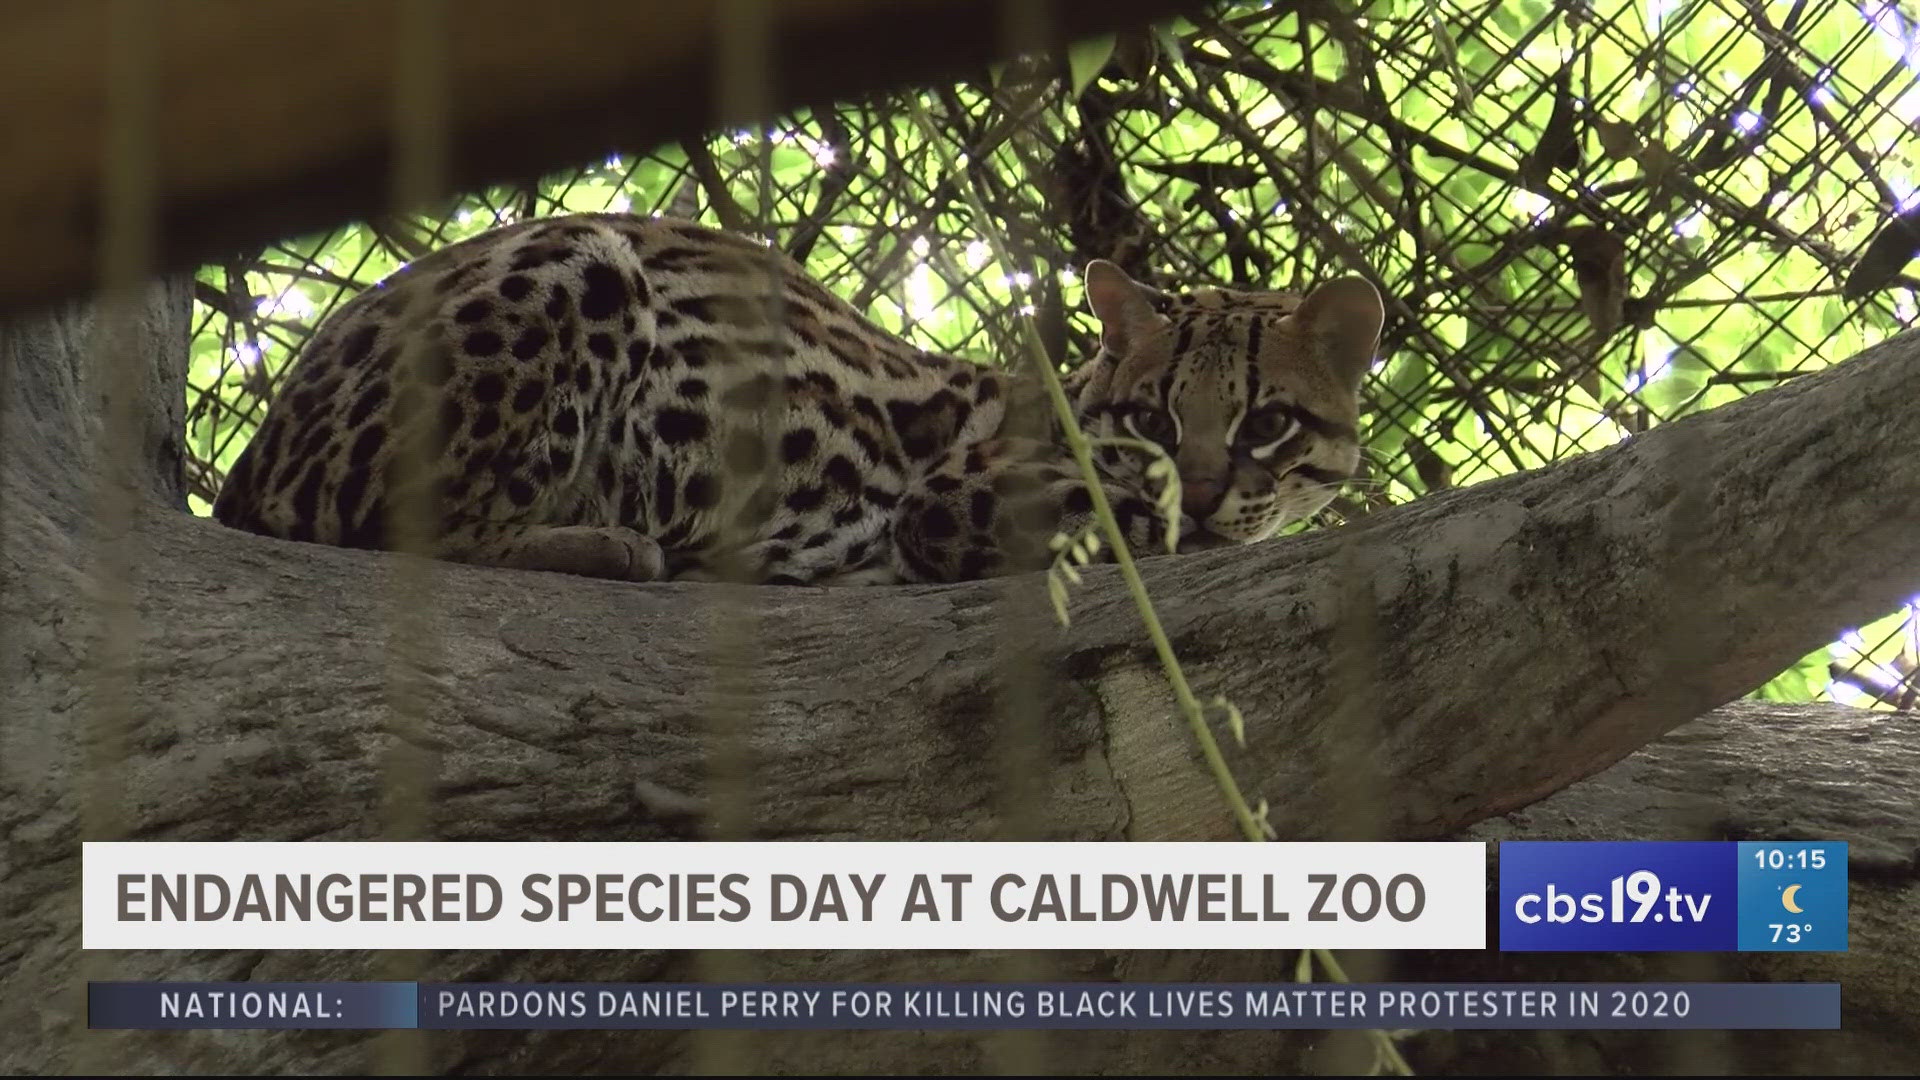 On Friday, the Caldwell Zoo celebrated endangered species day. The zoo currently has around thirty species of endangered animals.